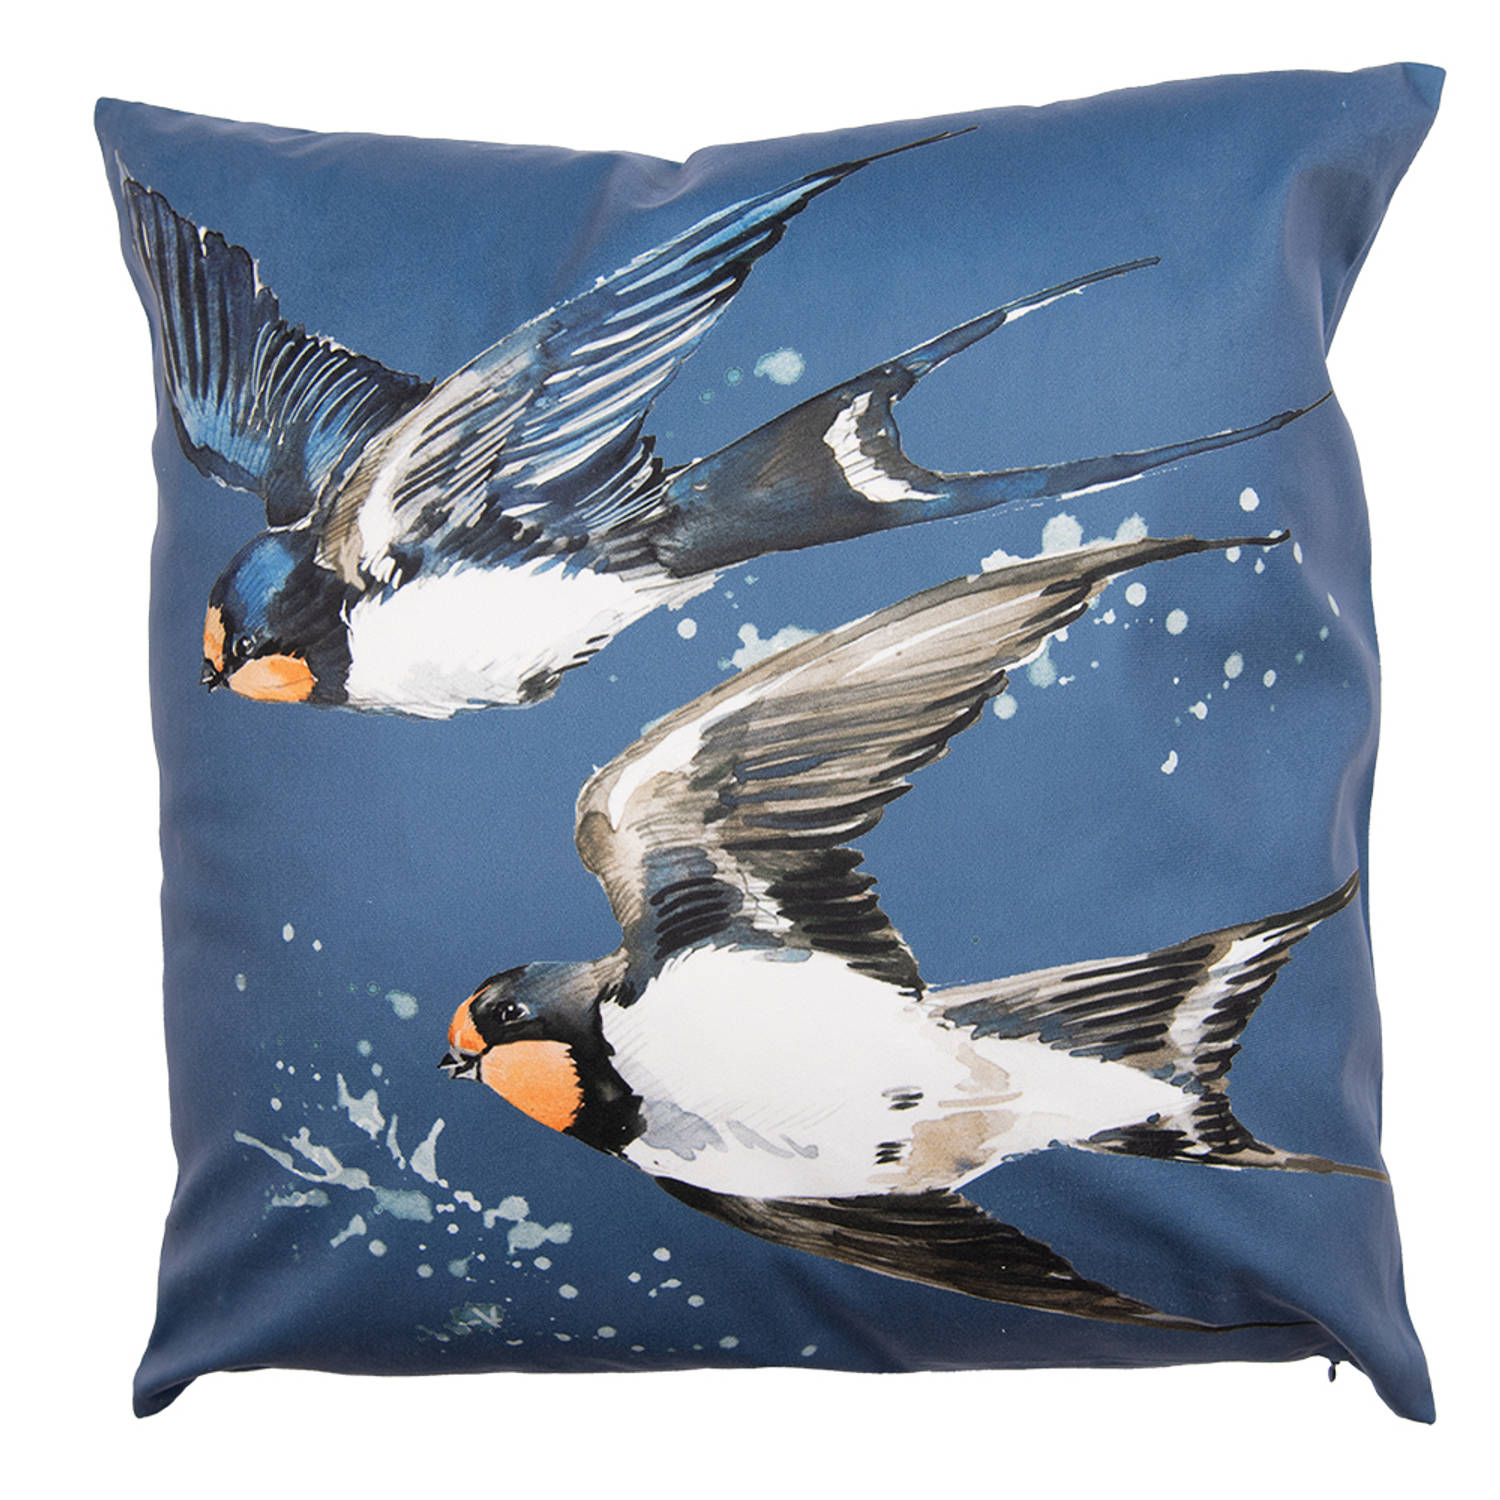 Clayre & Eef Kussenhoes 45x45 Cm Blauw Wit Polyester Vogels Sierkussenhoes Kussen Hoes Blauw Sierkus